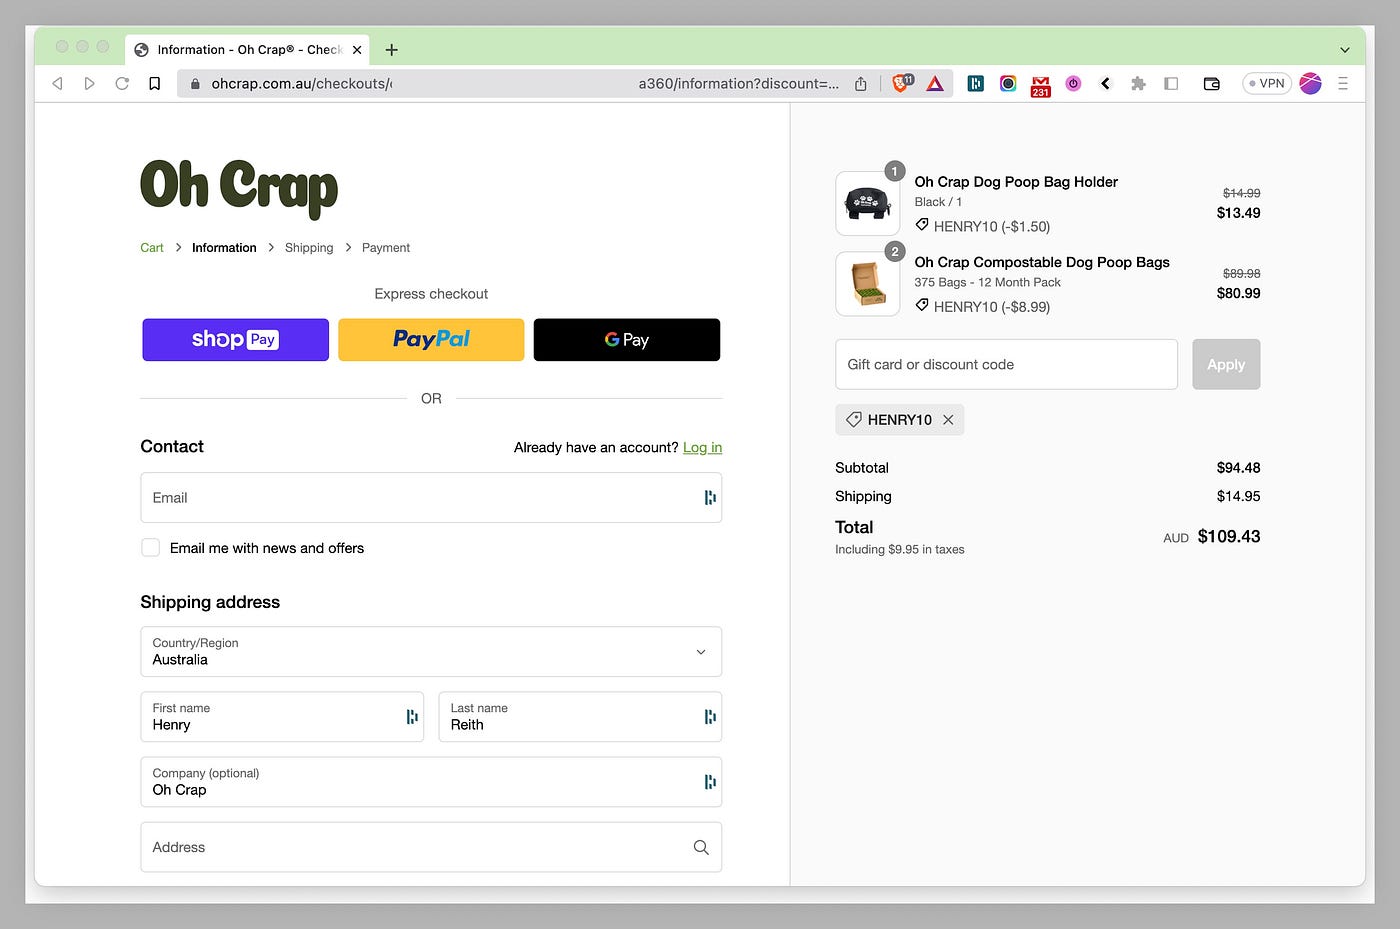 How To Automatically Add Discount Codes to Shopify Checkout Using Pure JS, by Henry Reith